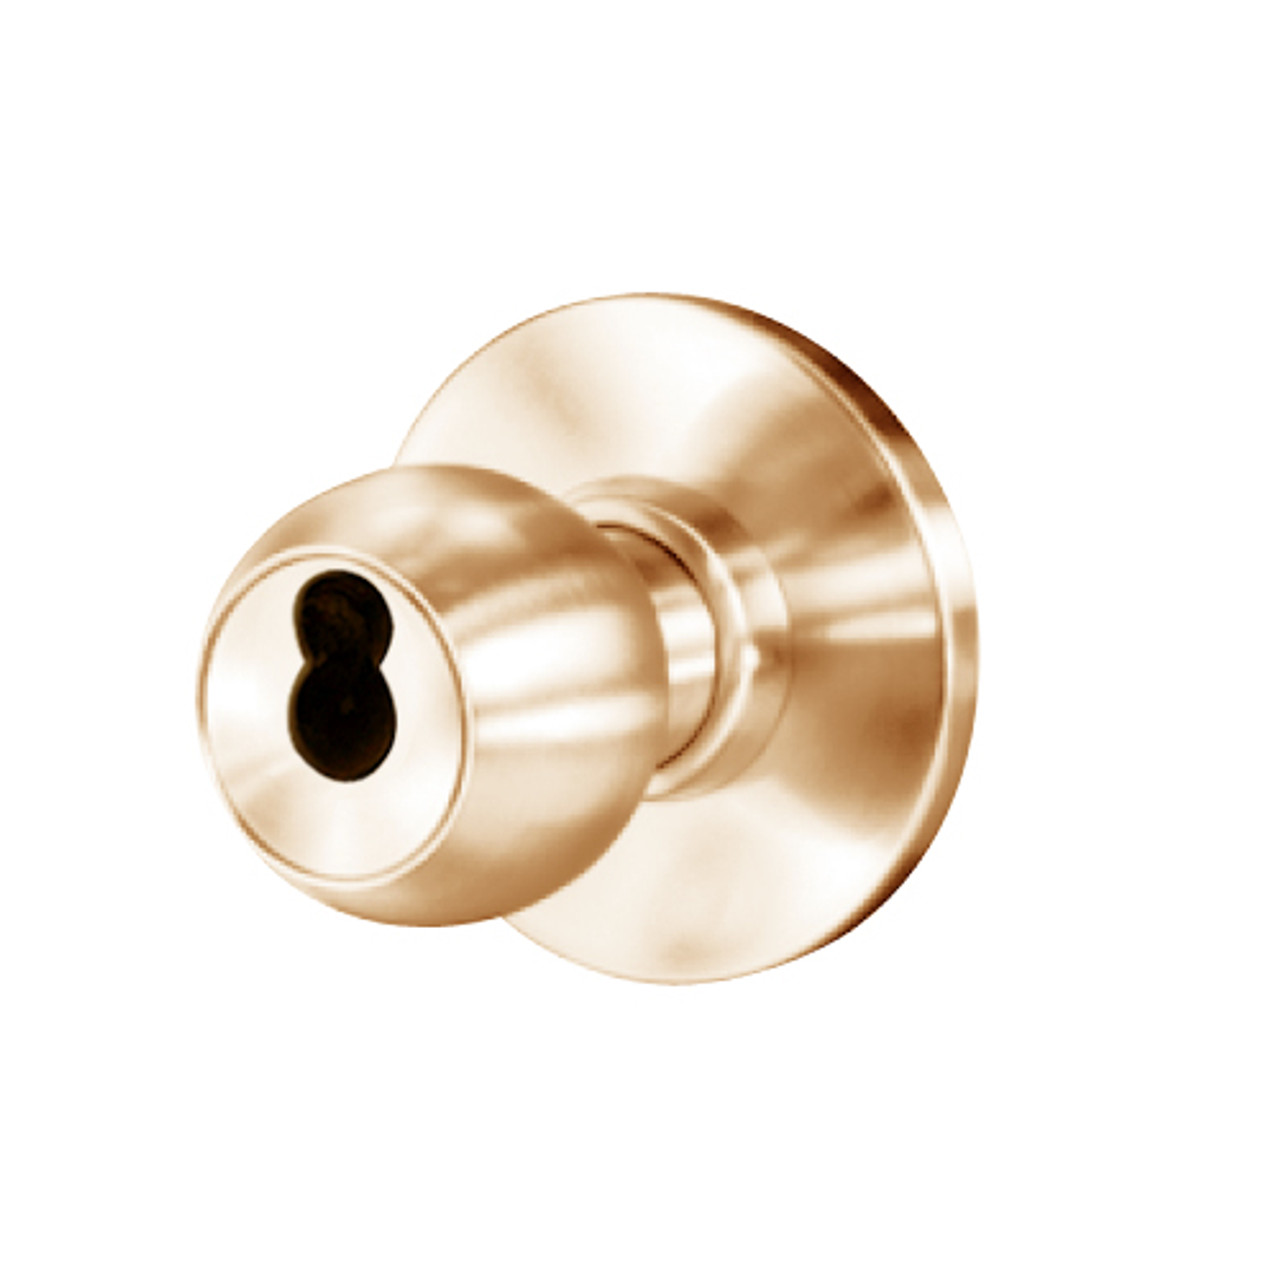 8K57YD4AS3611 Best 8K Series Exit Heavy Duty Cylindrical Knob Locks with Round Style in Bright Bronze